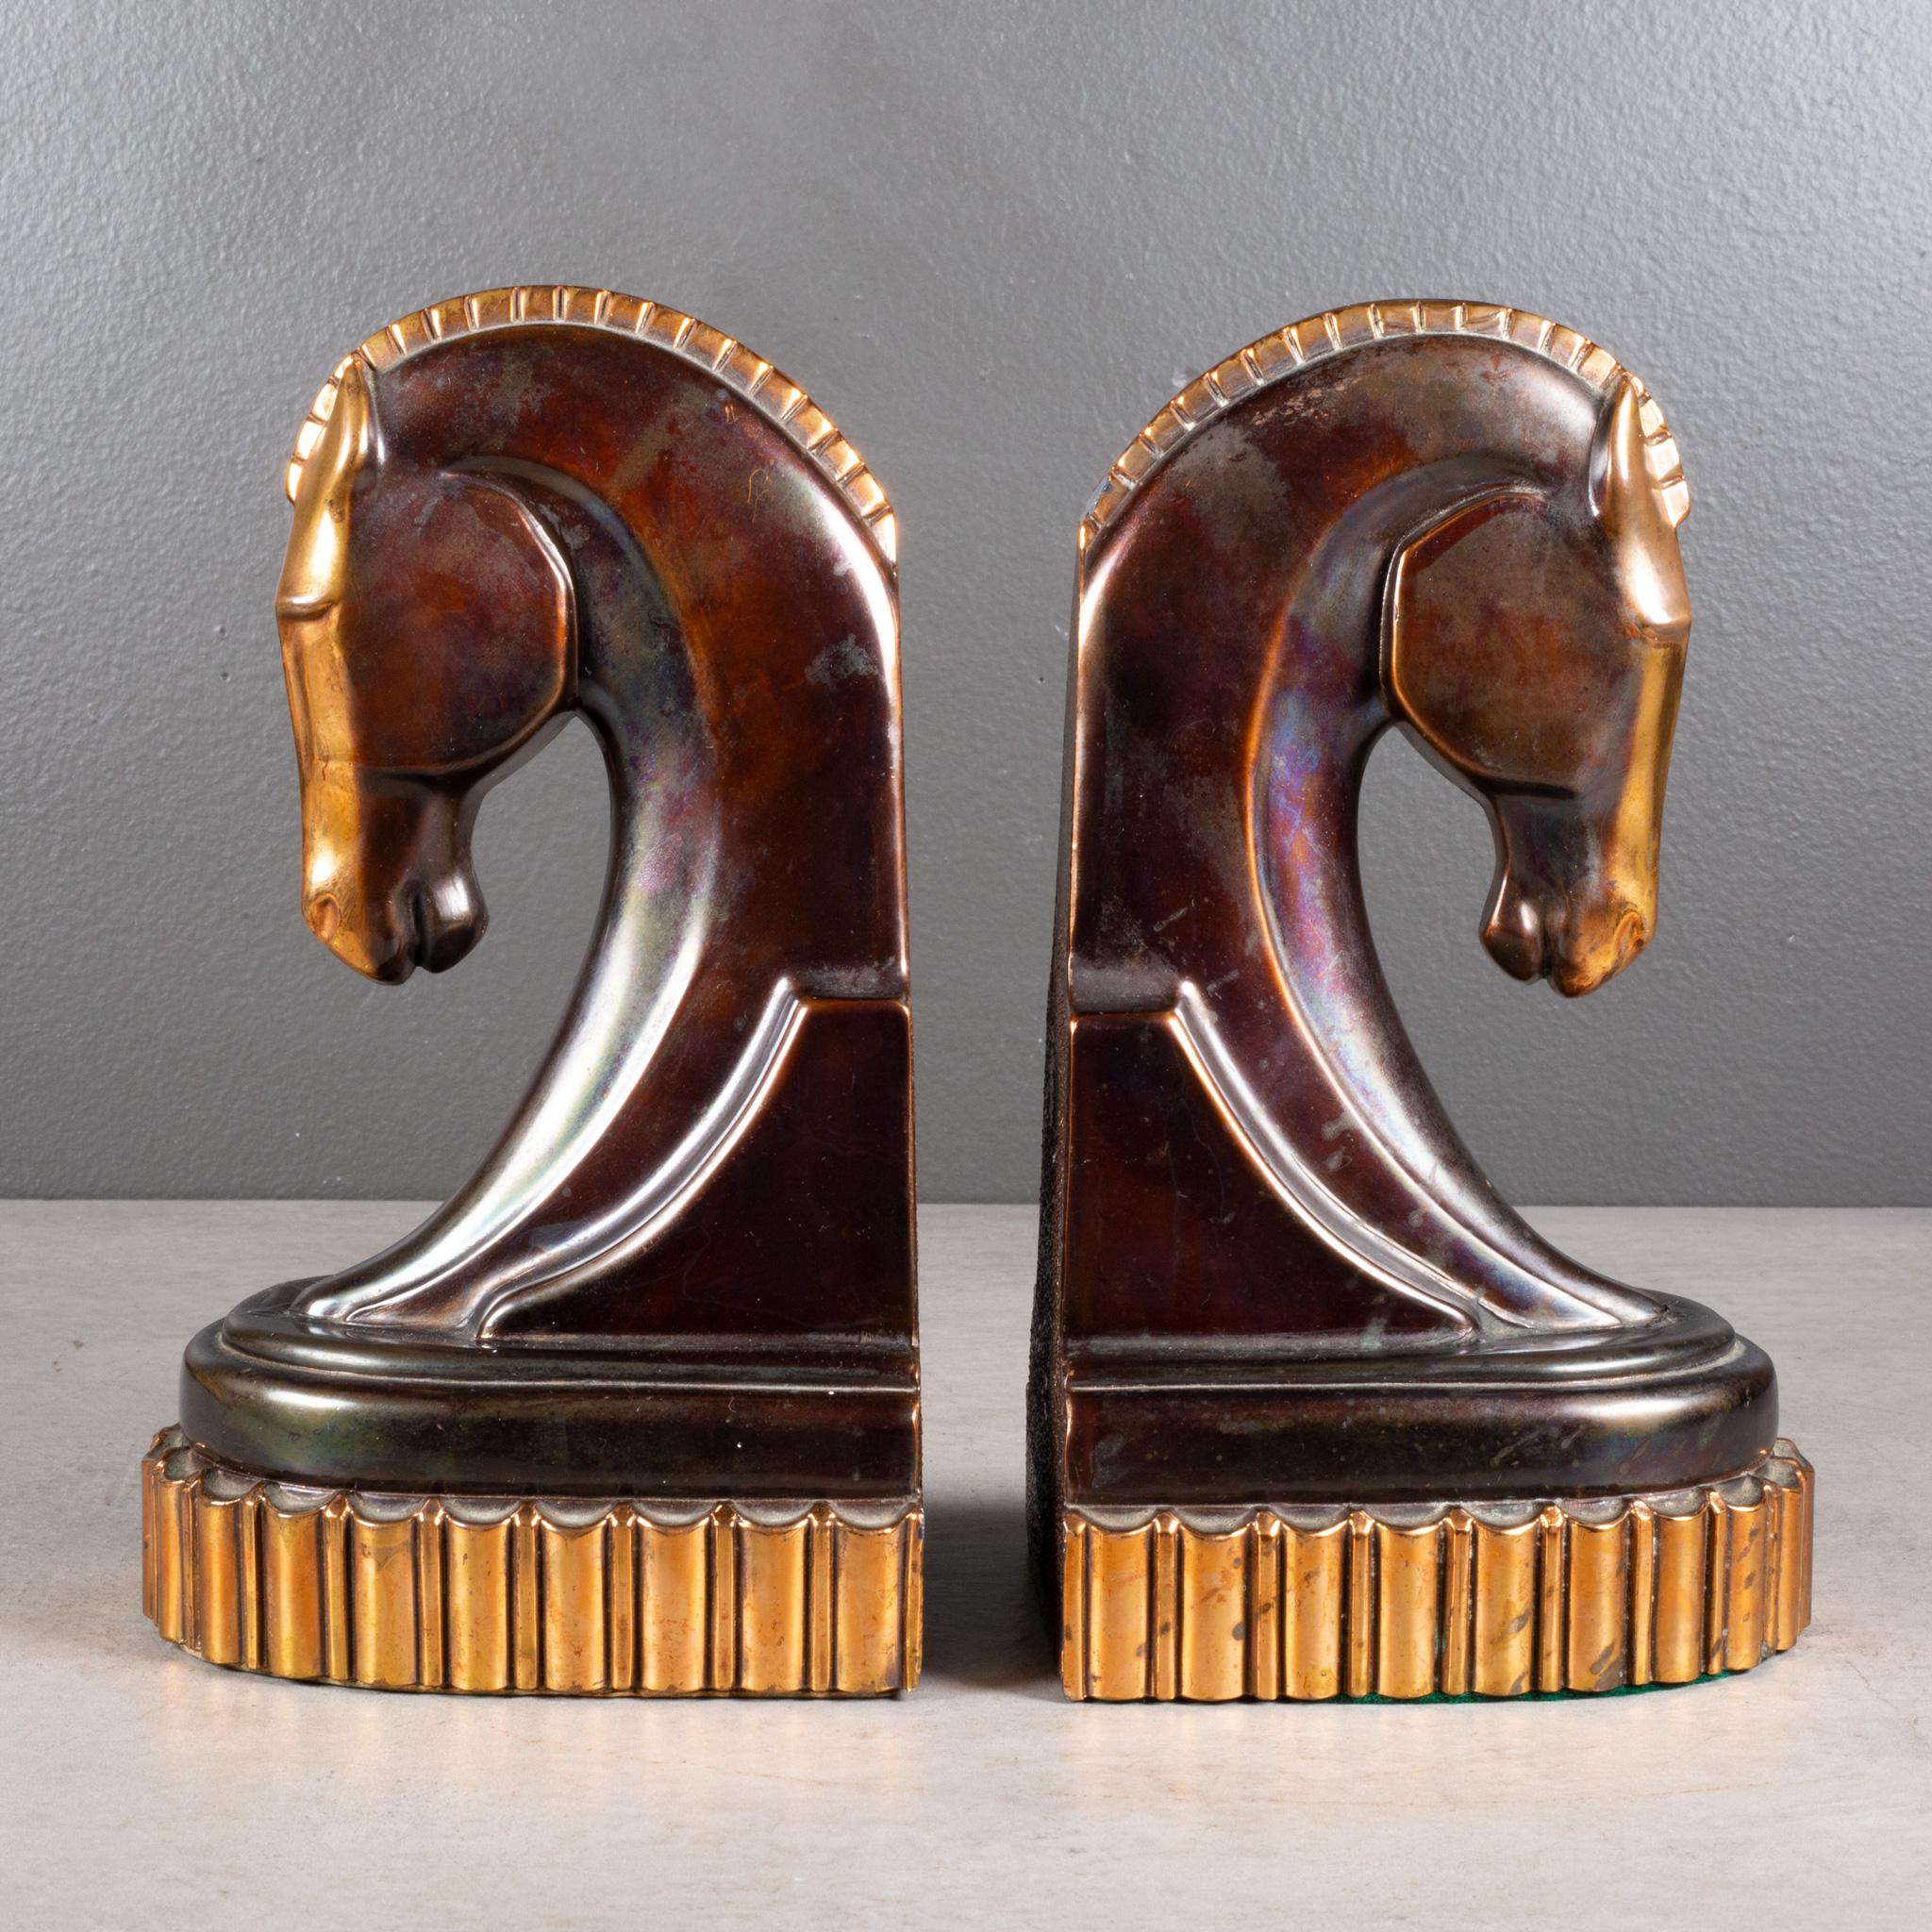 Plated Oversized Art Deco Bronze & Copper Trojan Horse Bookends c.1930 (FREE SHIPPING) For Sale